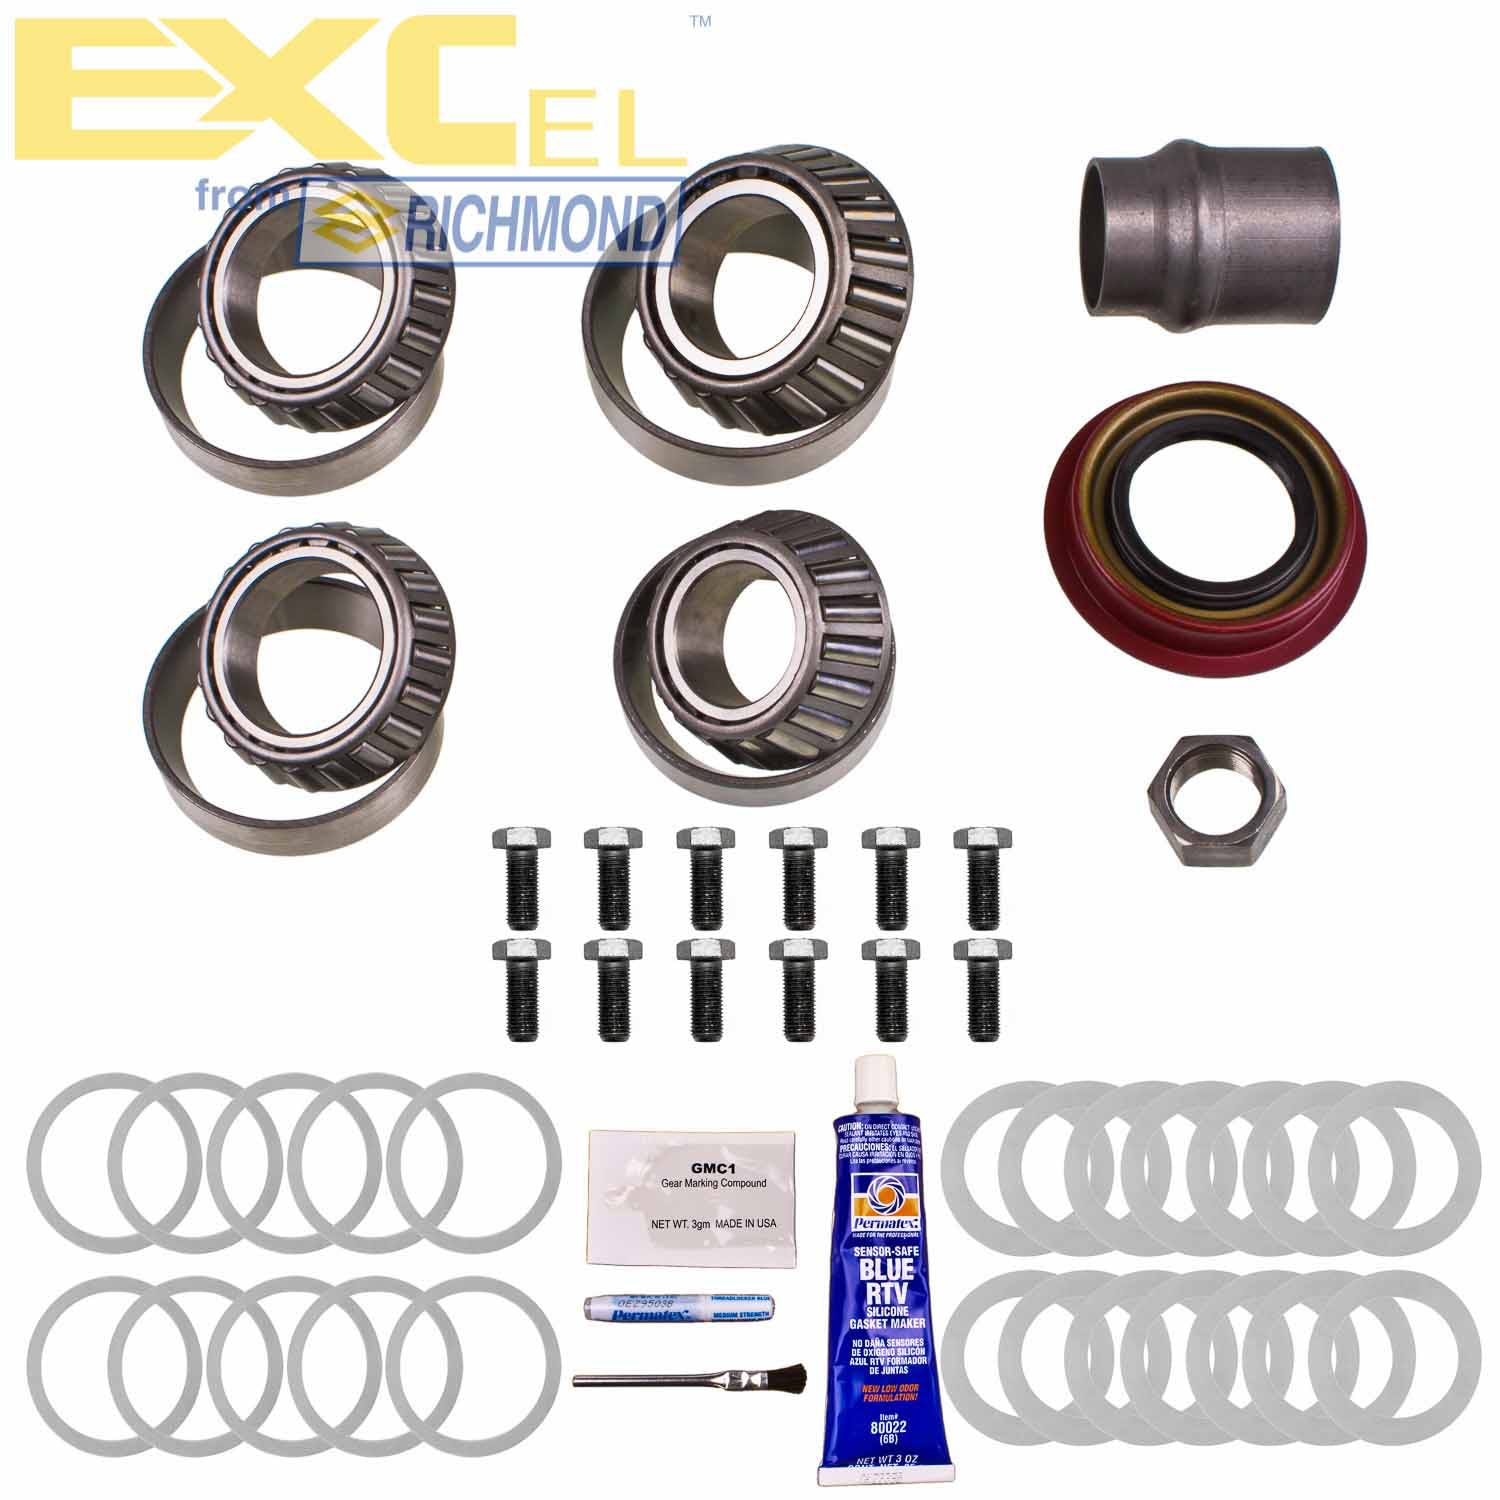 Excel XL-1019-1 Differential Bearing Kit